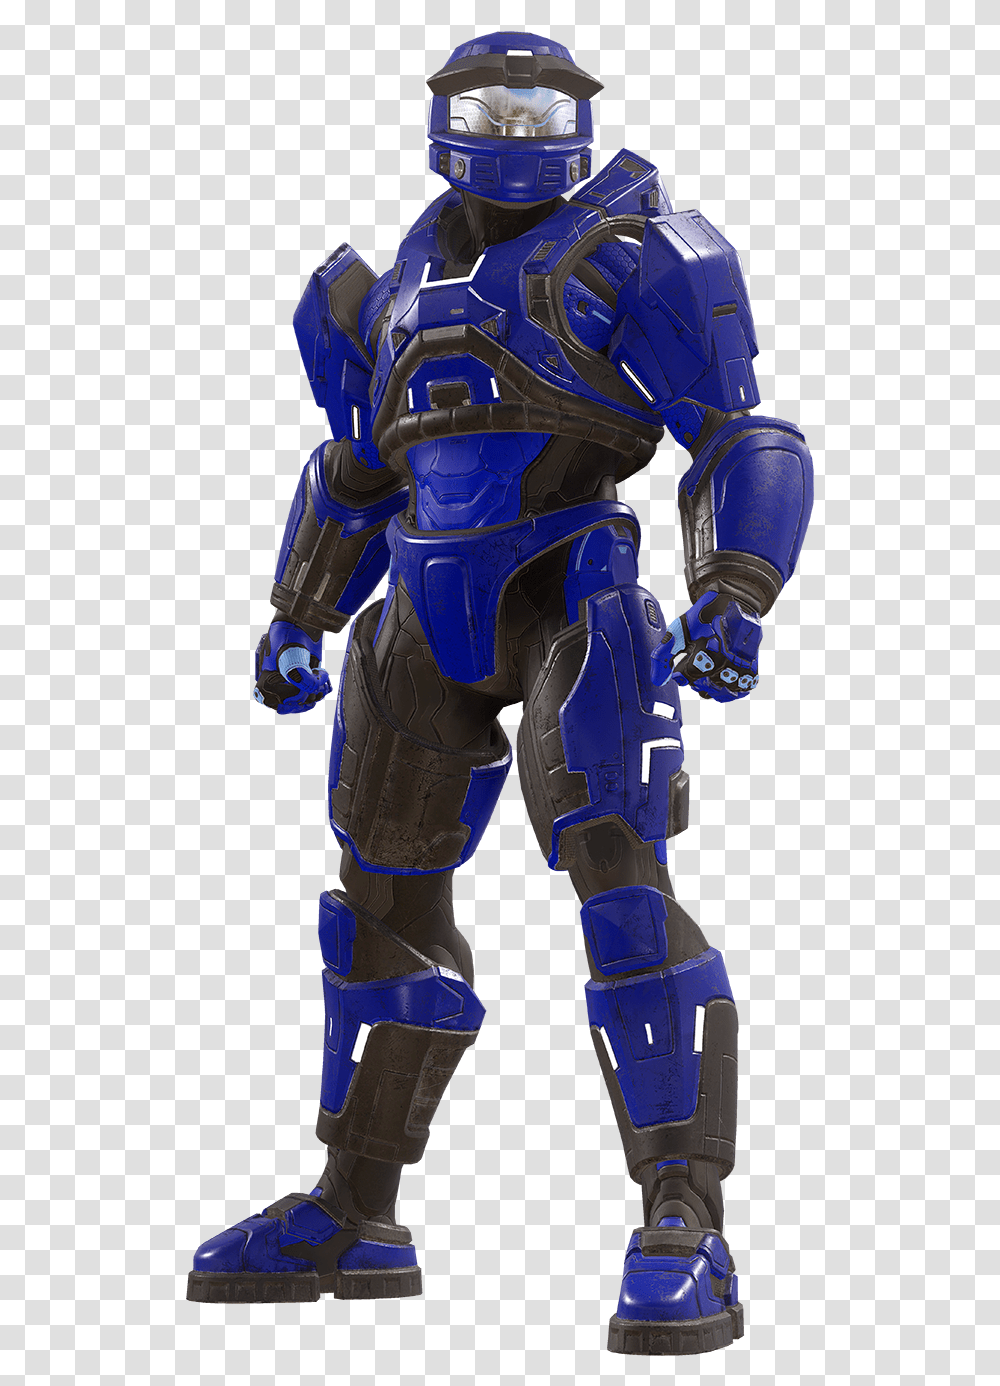 Download Darkseid Image With No Background Halo 5 Mark 5 Armor, Helmet, Apparel, Toy Transparent Png